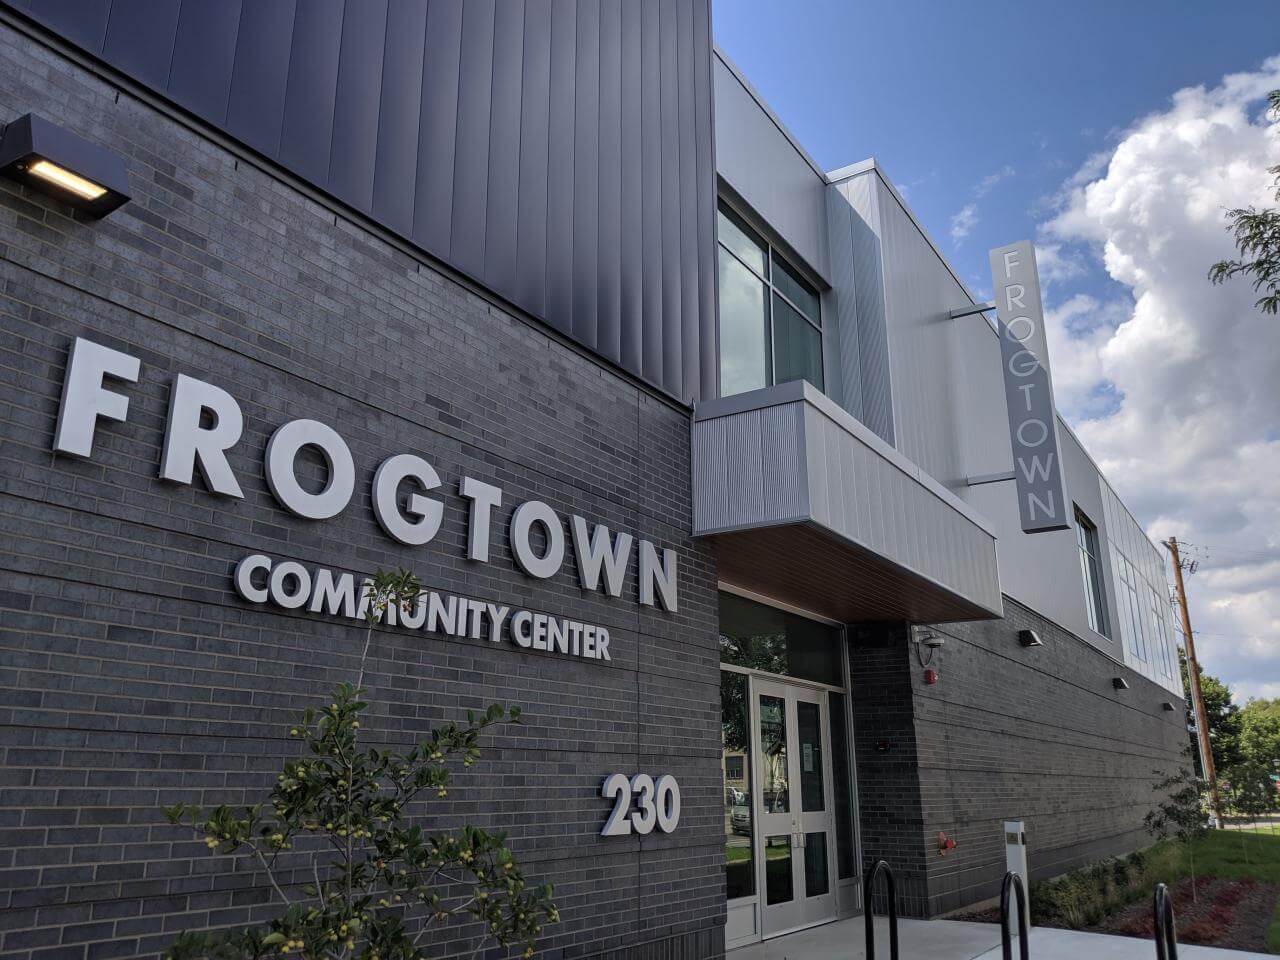 Frogtown_for guide